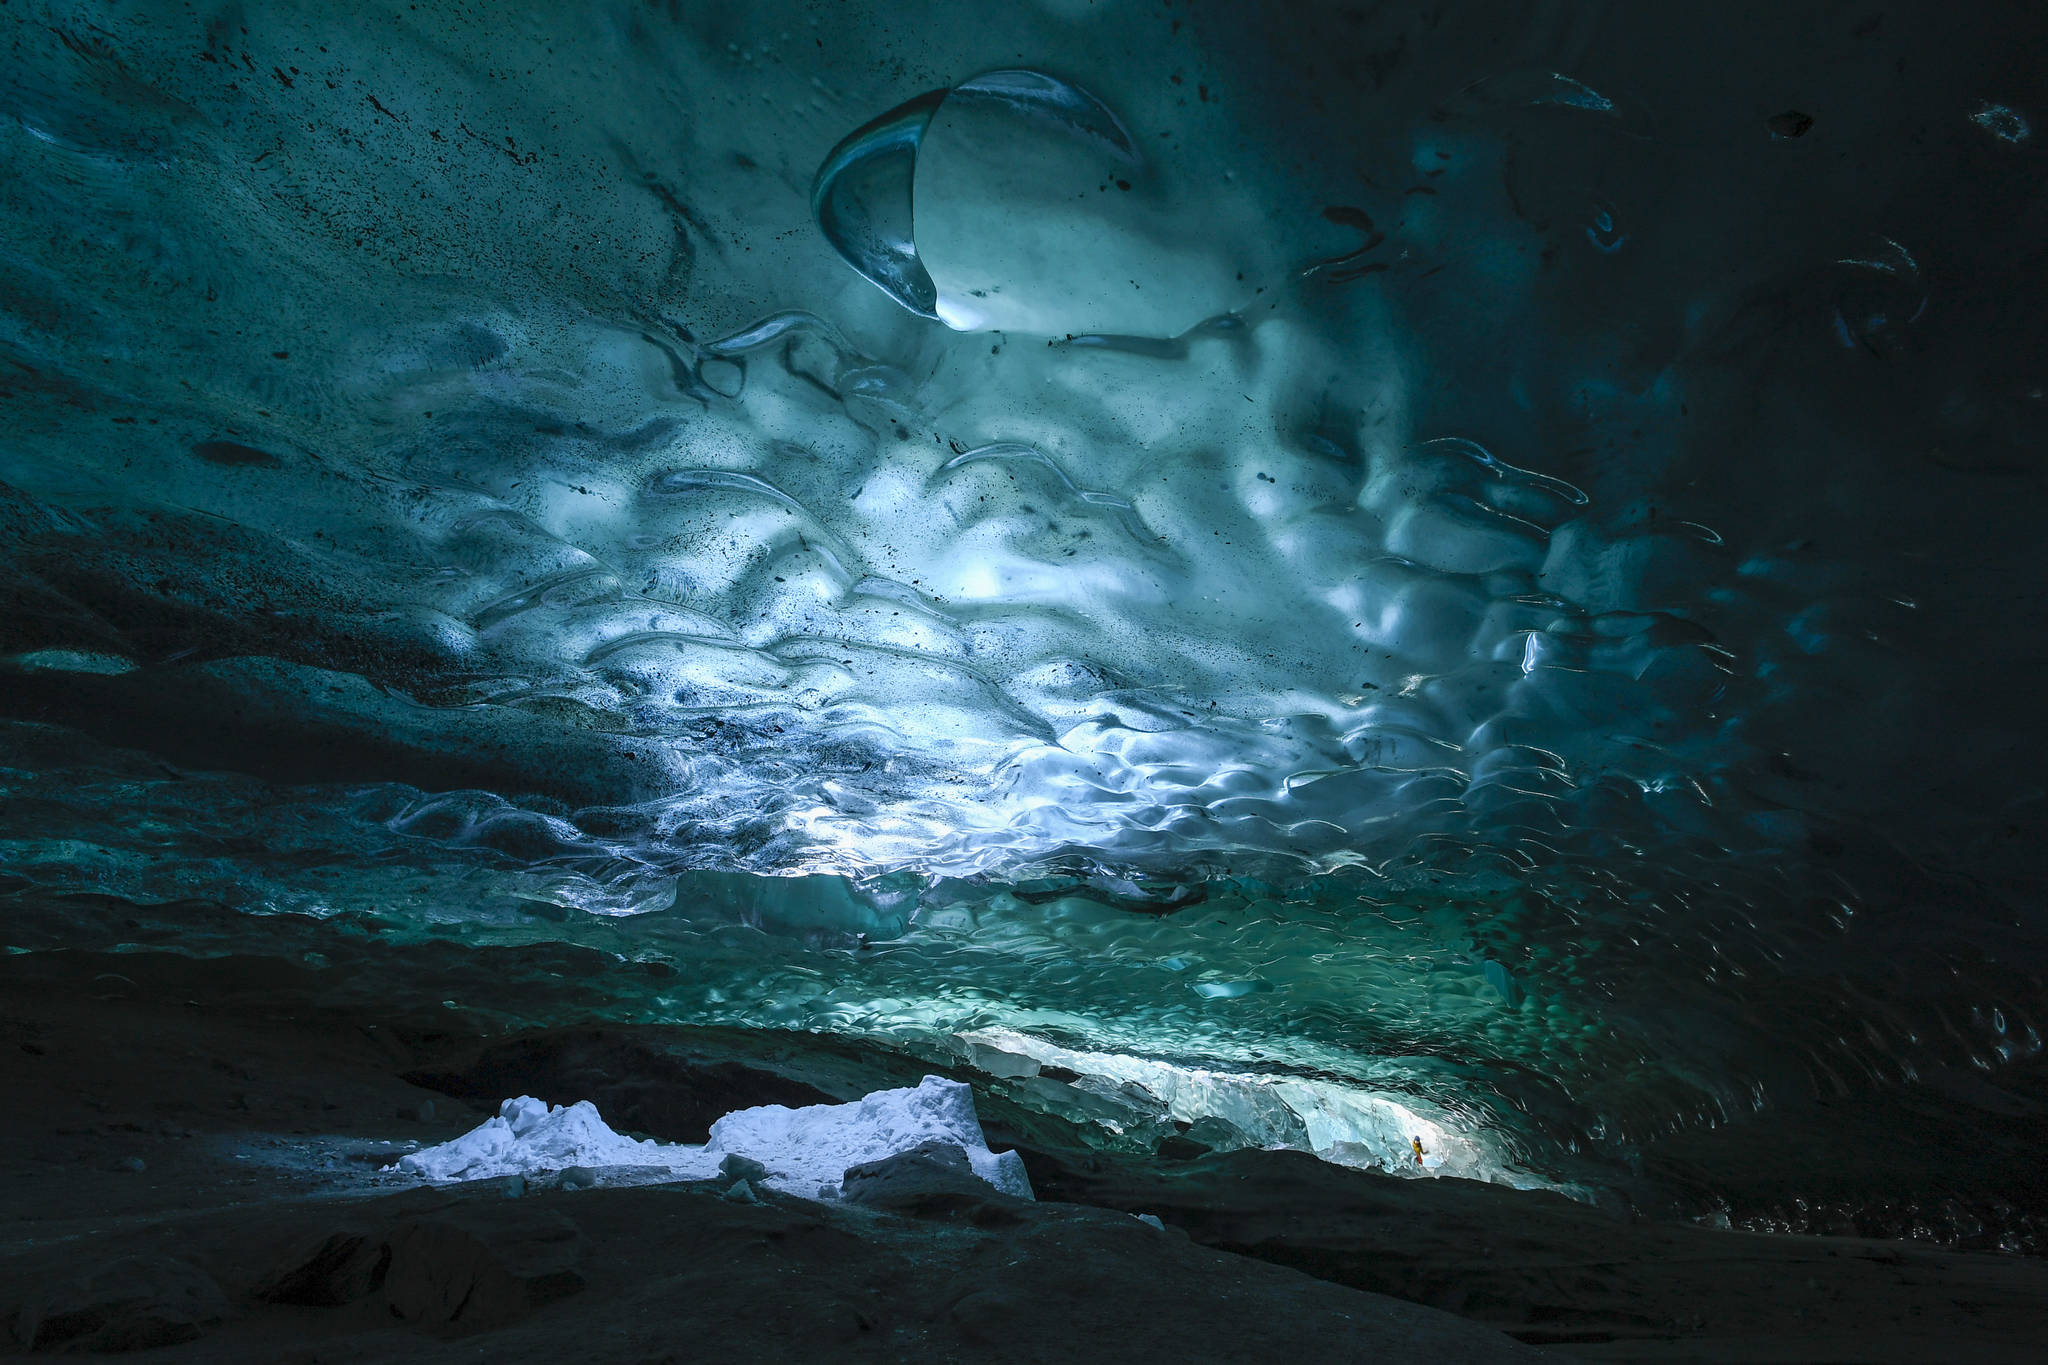 Interior views of an ice cave at the Mendenhall Glacier on Monday, Feb. 11, 2019. (Michael Penn | Juneau Empire)